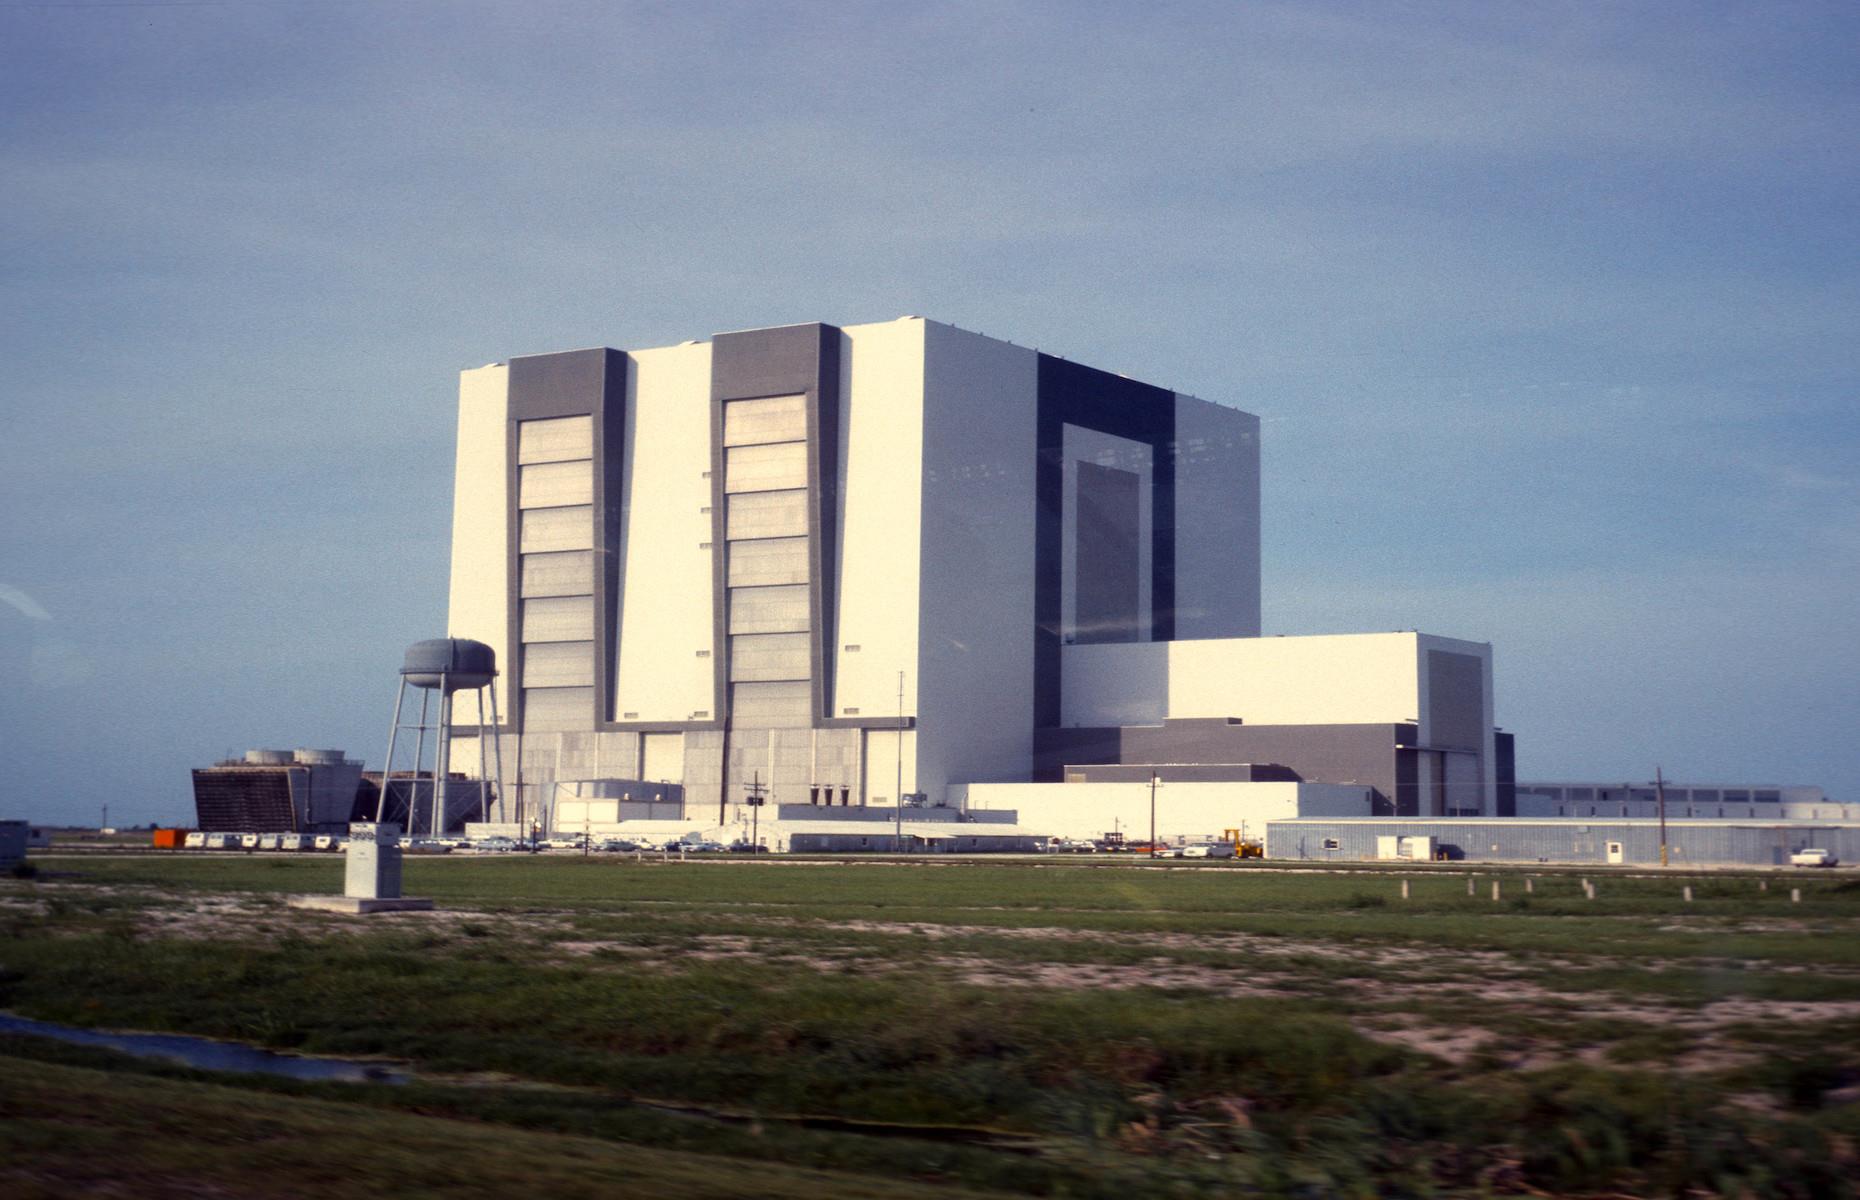 With a growing fascination for NASA’s rocket launches, the public flocked to the Cape Canaveral area to get a glimpse of the launch pads and facilities. In 1963, drive-through tours were permitted on Sunday afternoons and an estimated 100,000 visitors took part in the first year. In 1965, tours were expanded to include parts of Kennedy Space Center – there were nearly 2,000 visitors on the first day and a dedicated visitor center was subsequently funded.